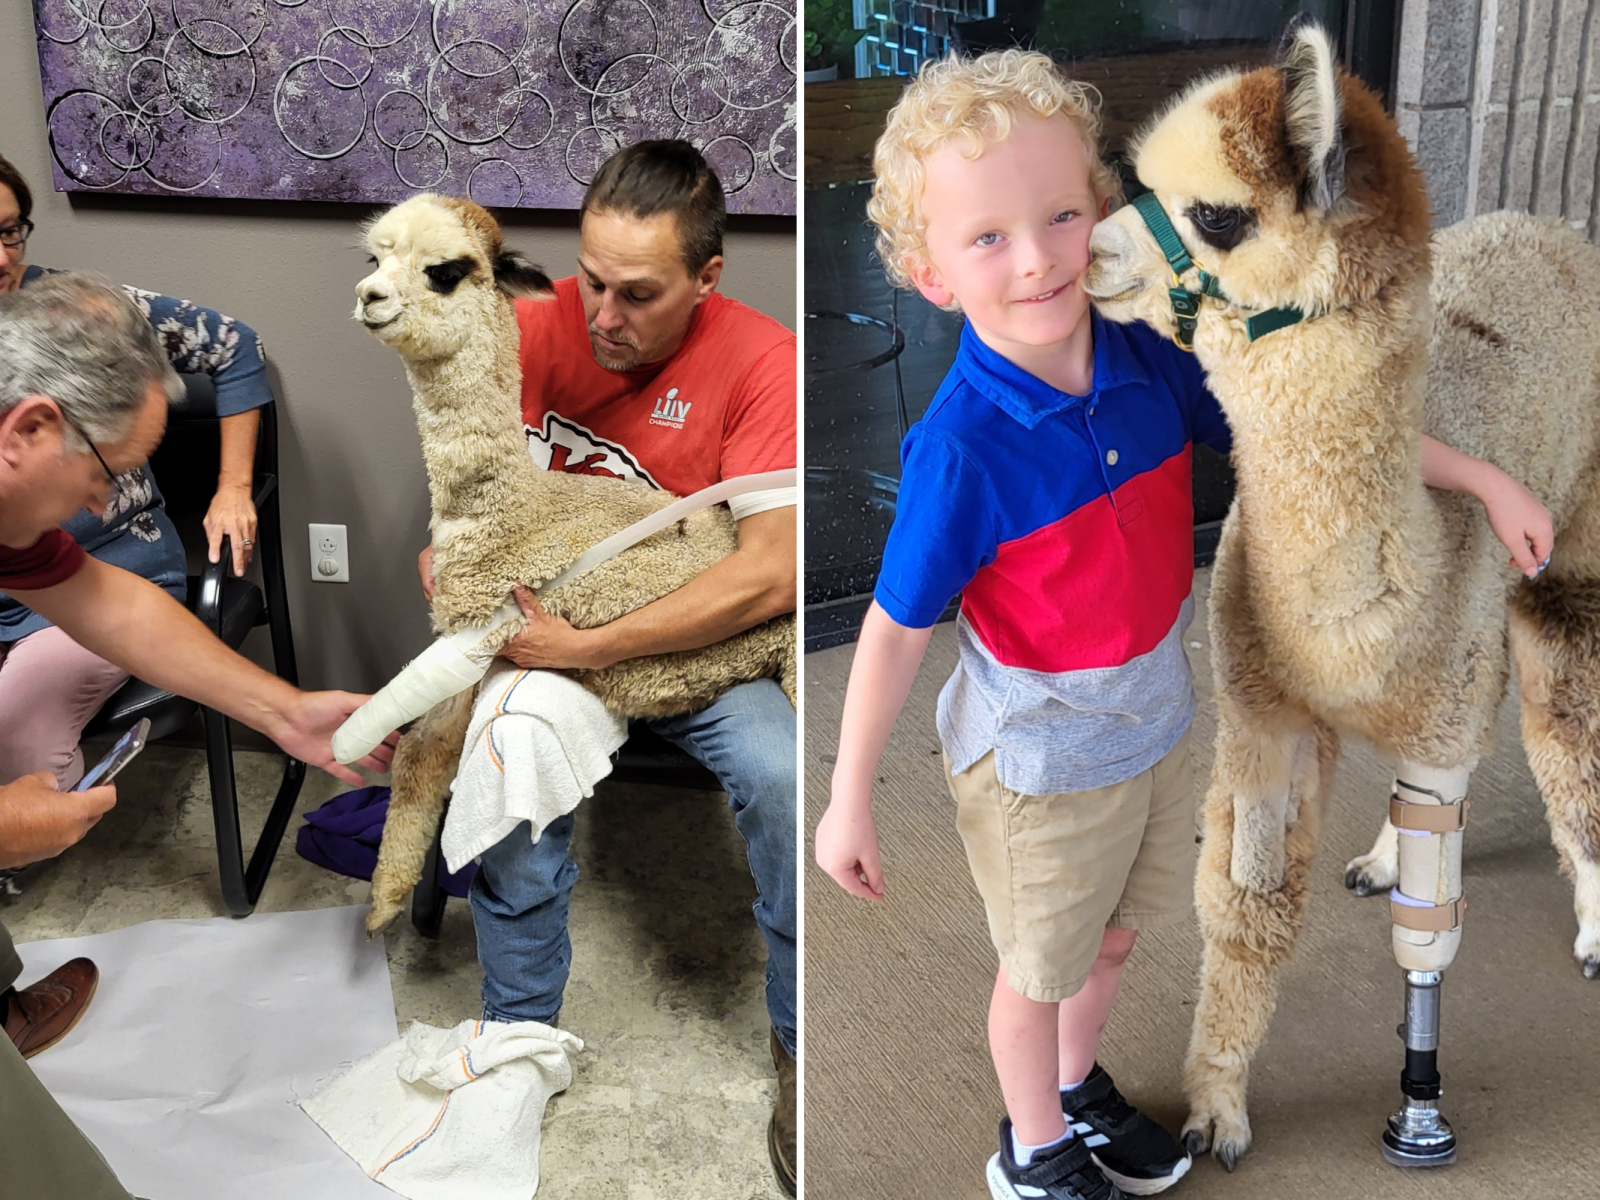 Baby Alpaca Learns to Walk Again Thanks to Prosthetic Leg in Adorable Clip